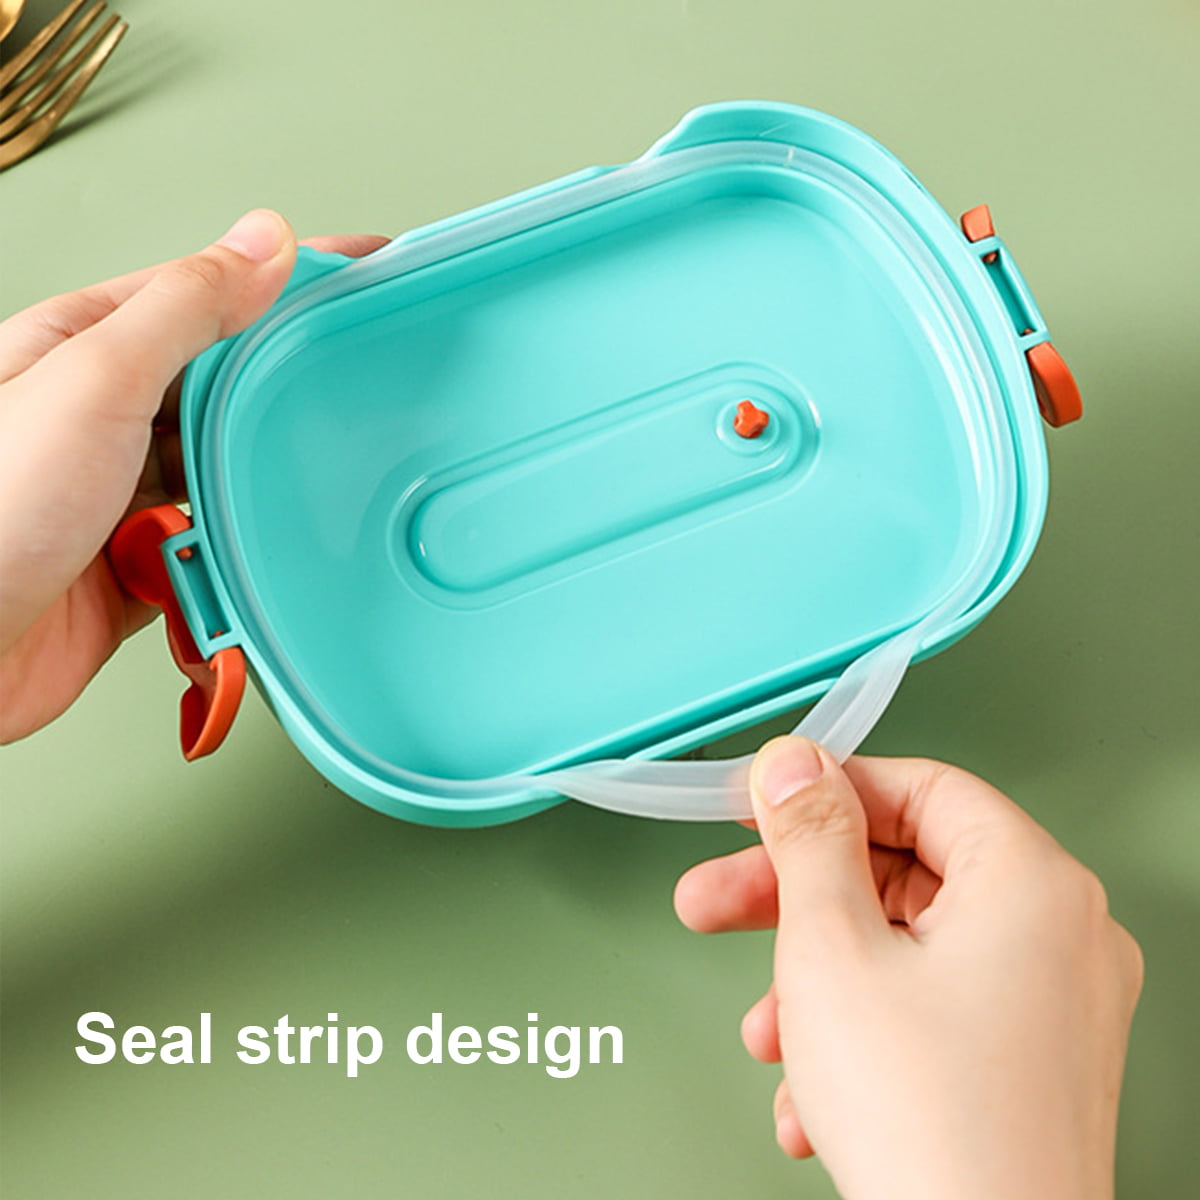 Hotbest Portable Food Warmer School Lunch Box Bento Thermal Insulated Food Container Stainless Steel Insulated Square Lunch Box for Children, Kids and